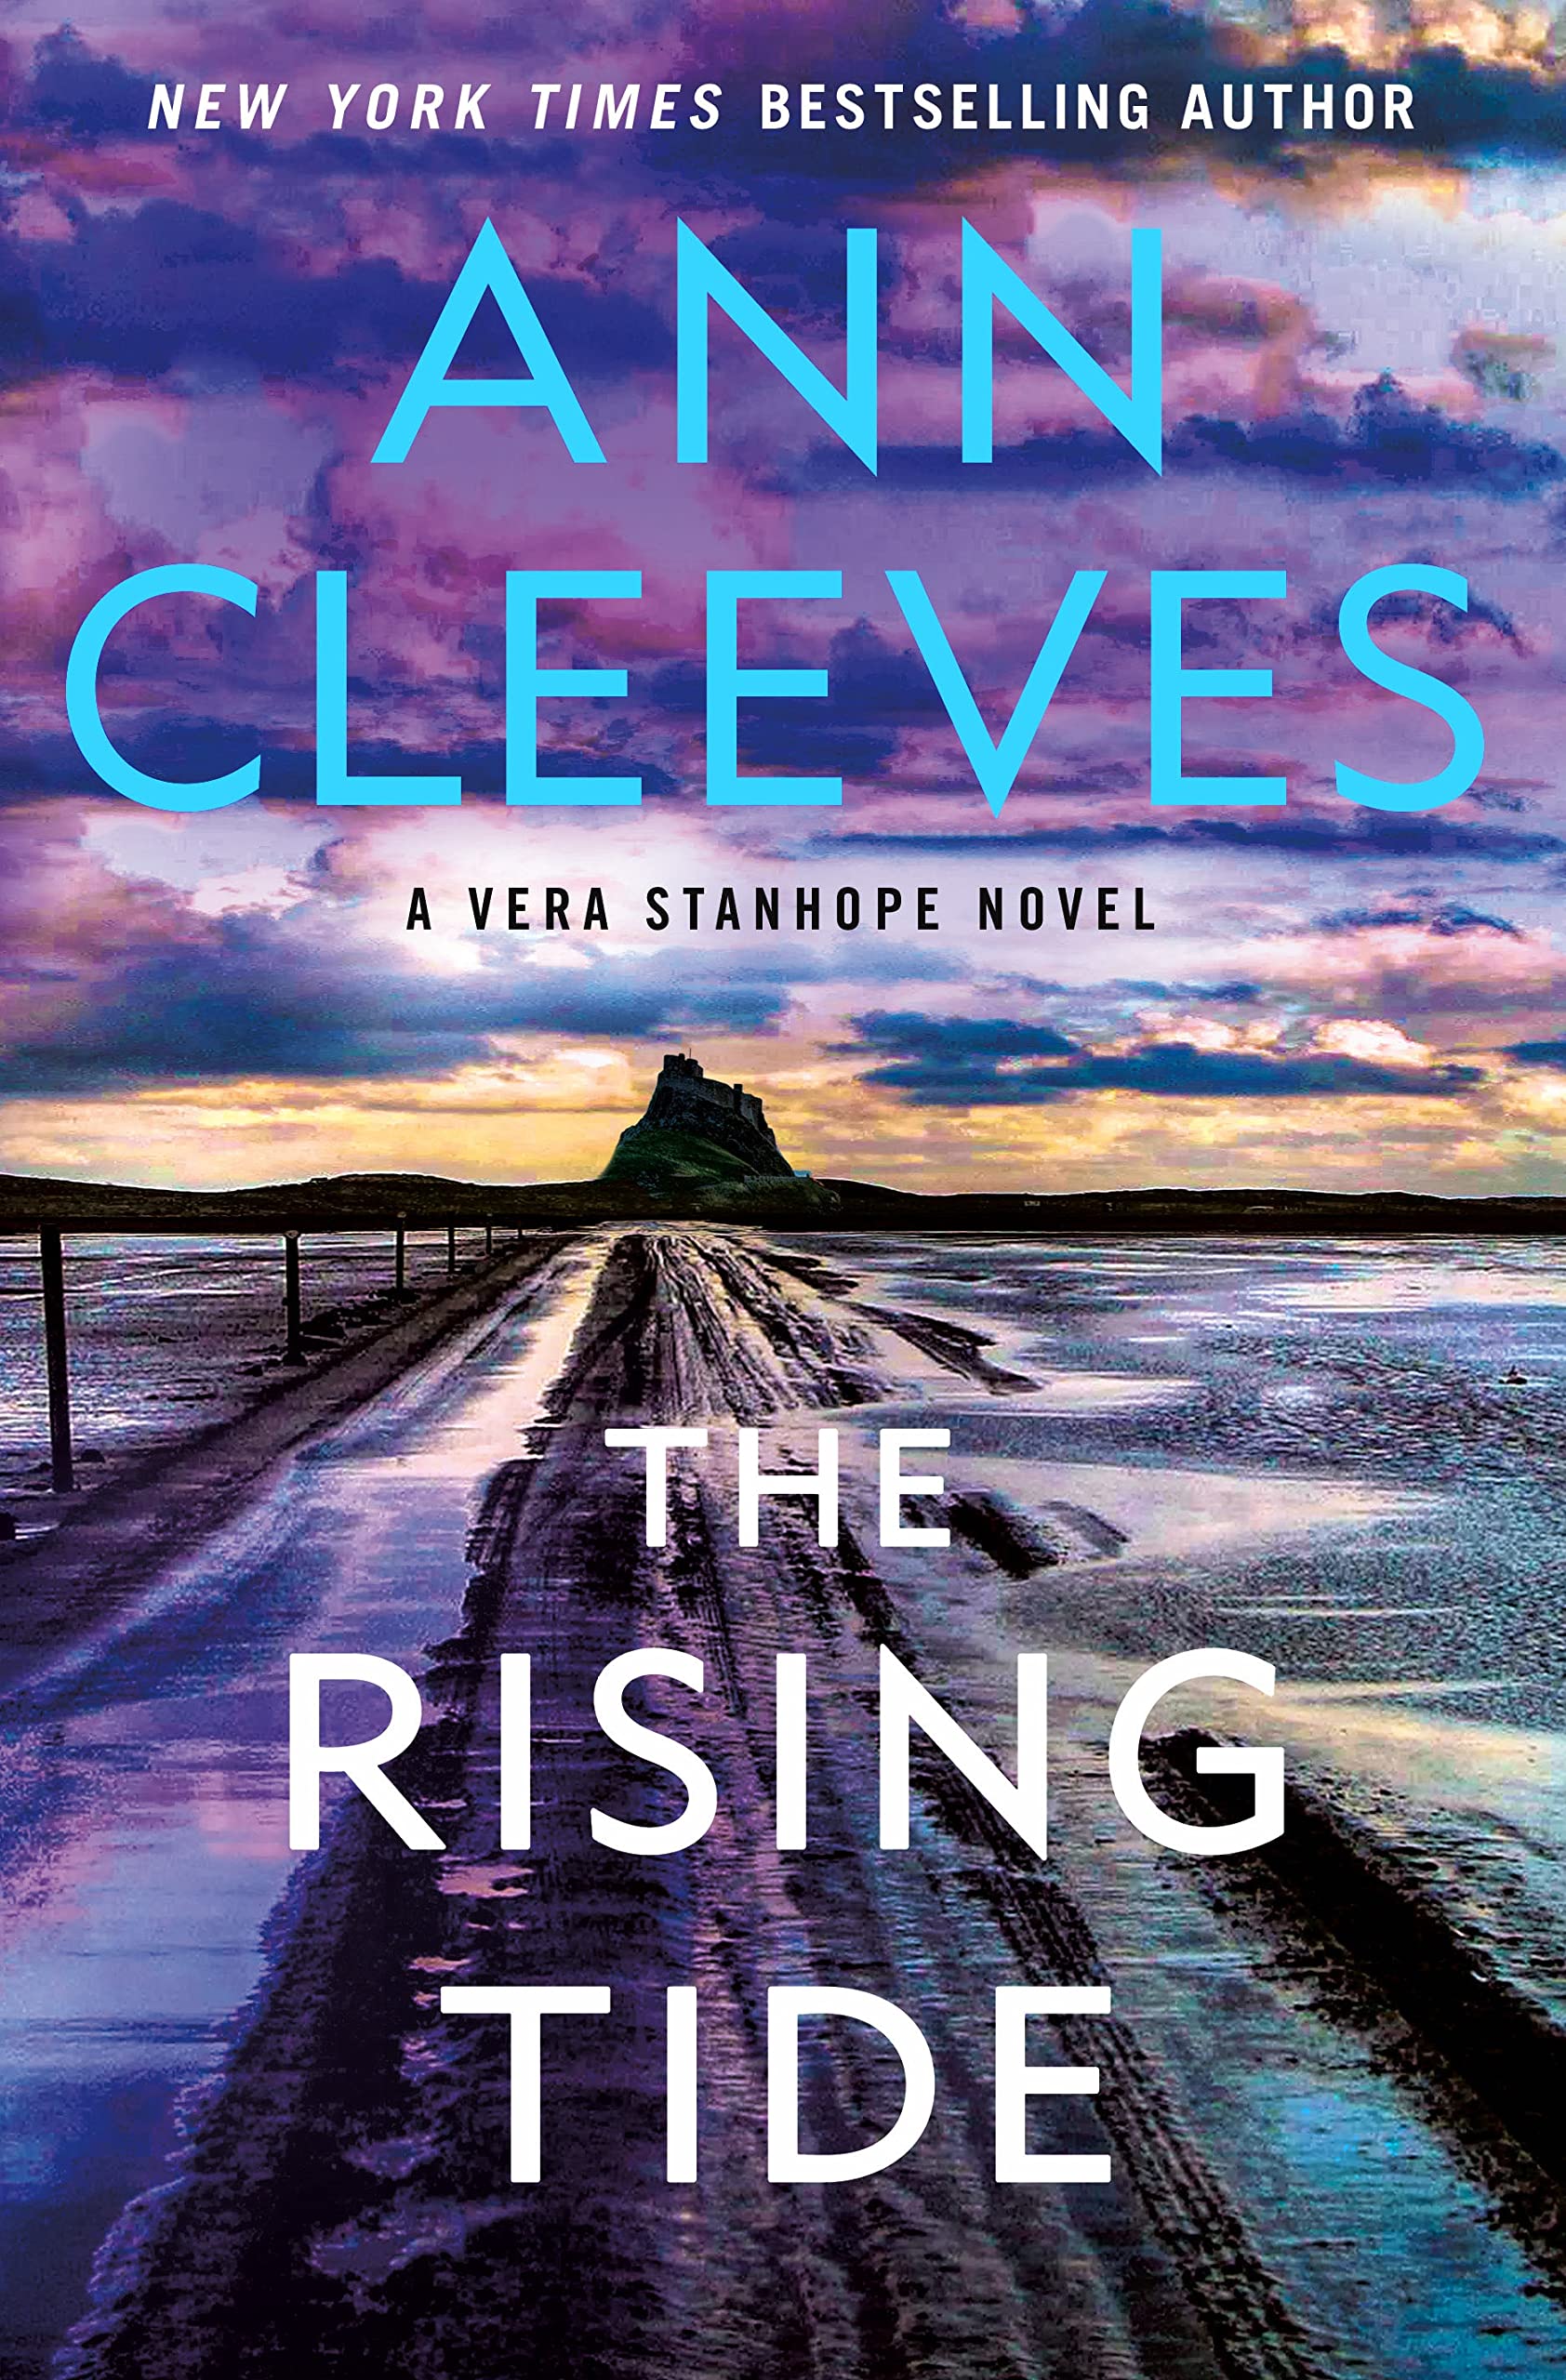 The Rising Tide A Vera Stanhope Novel By Ann Cleeves Review/Giveaway